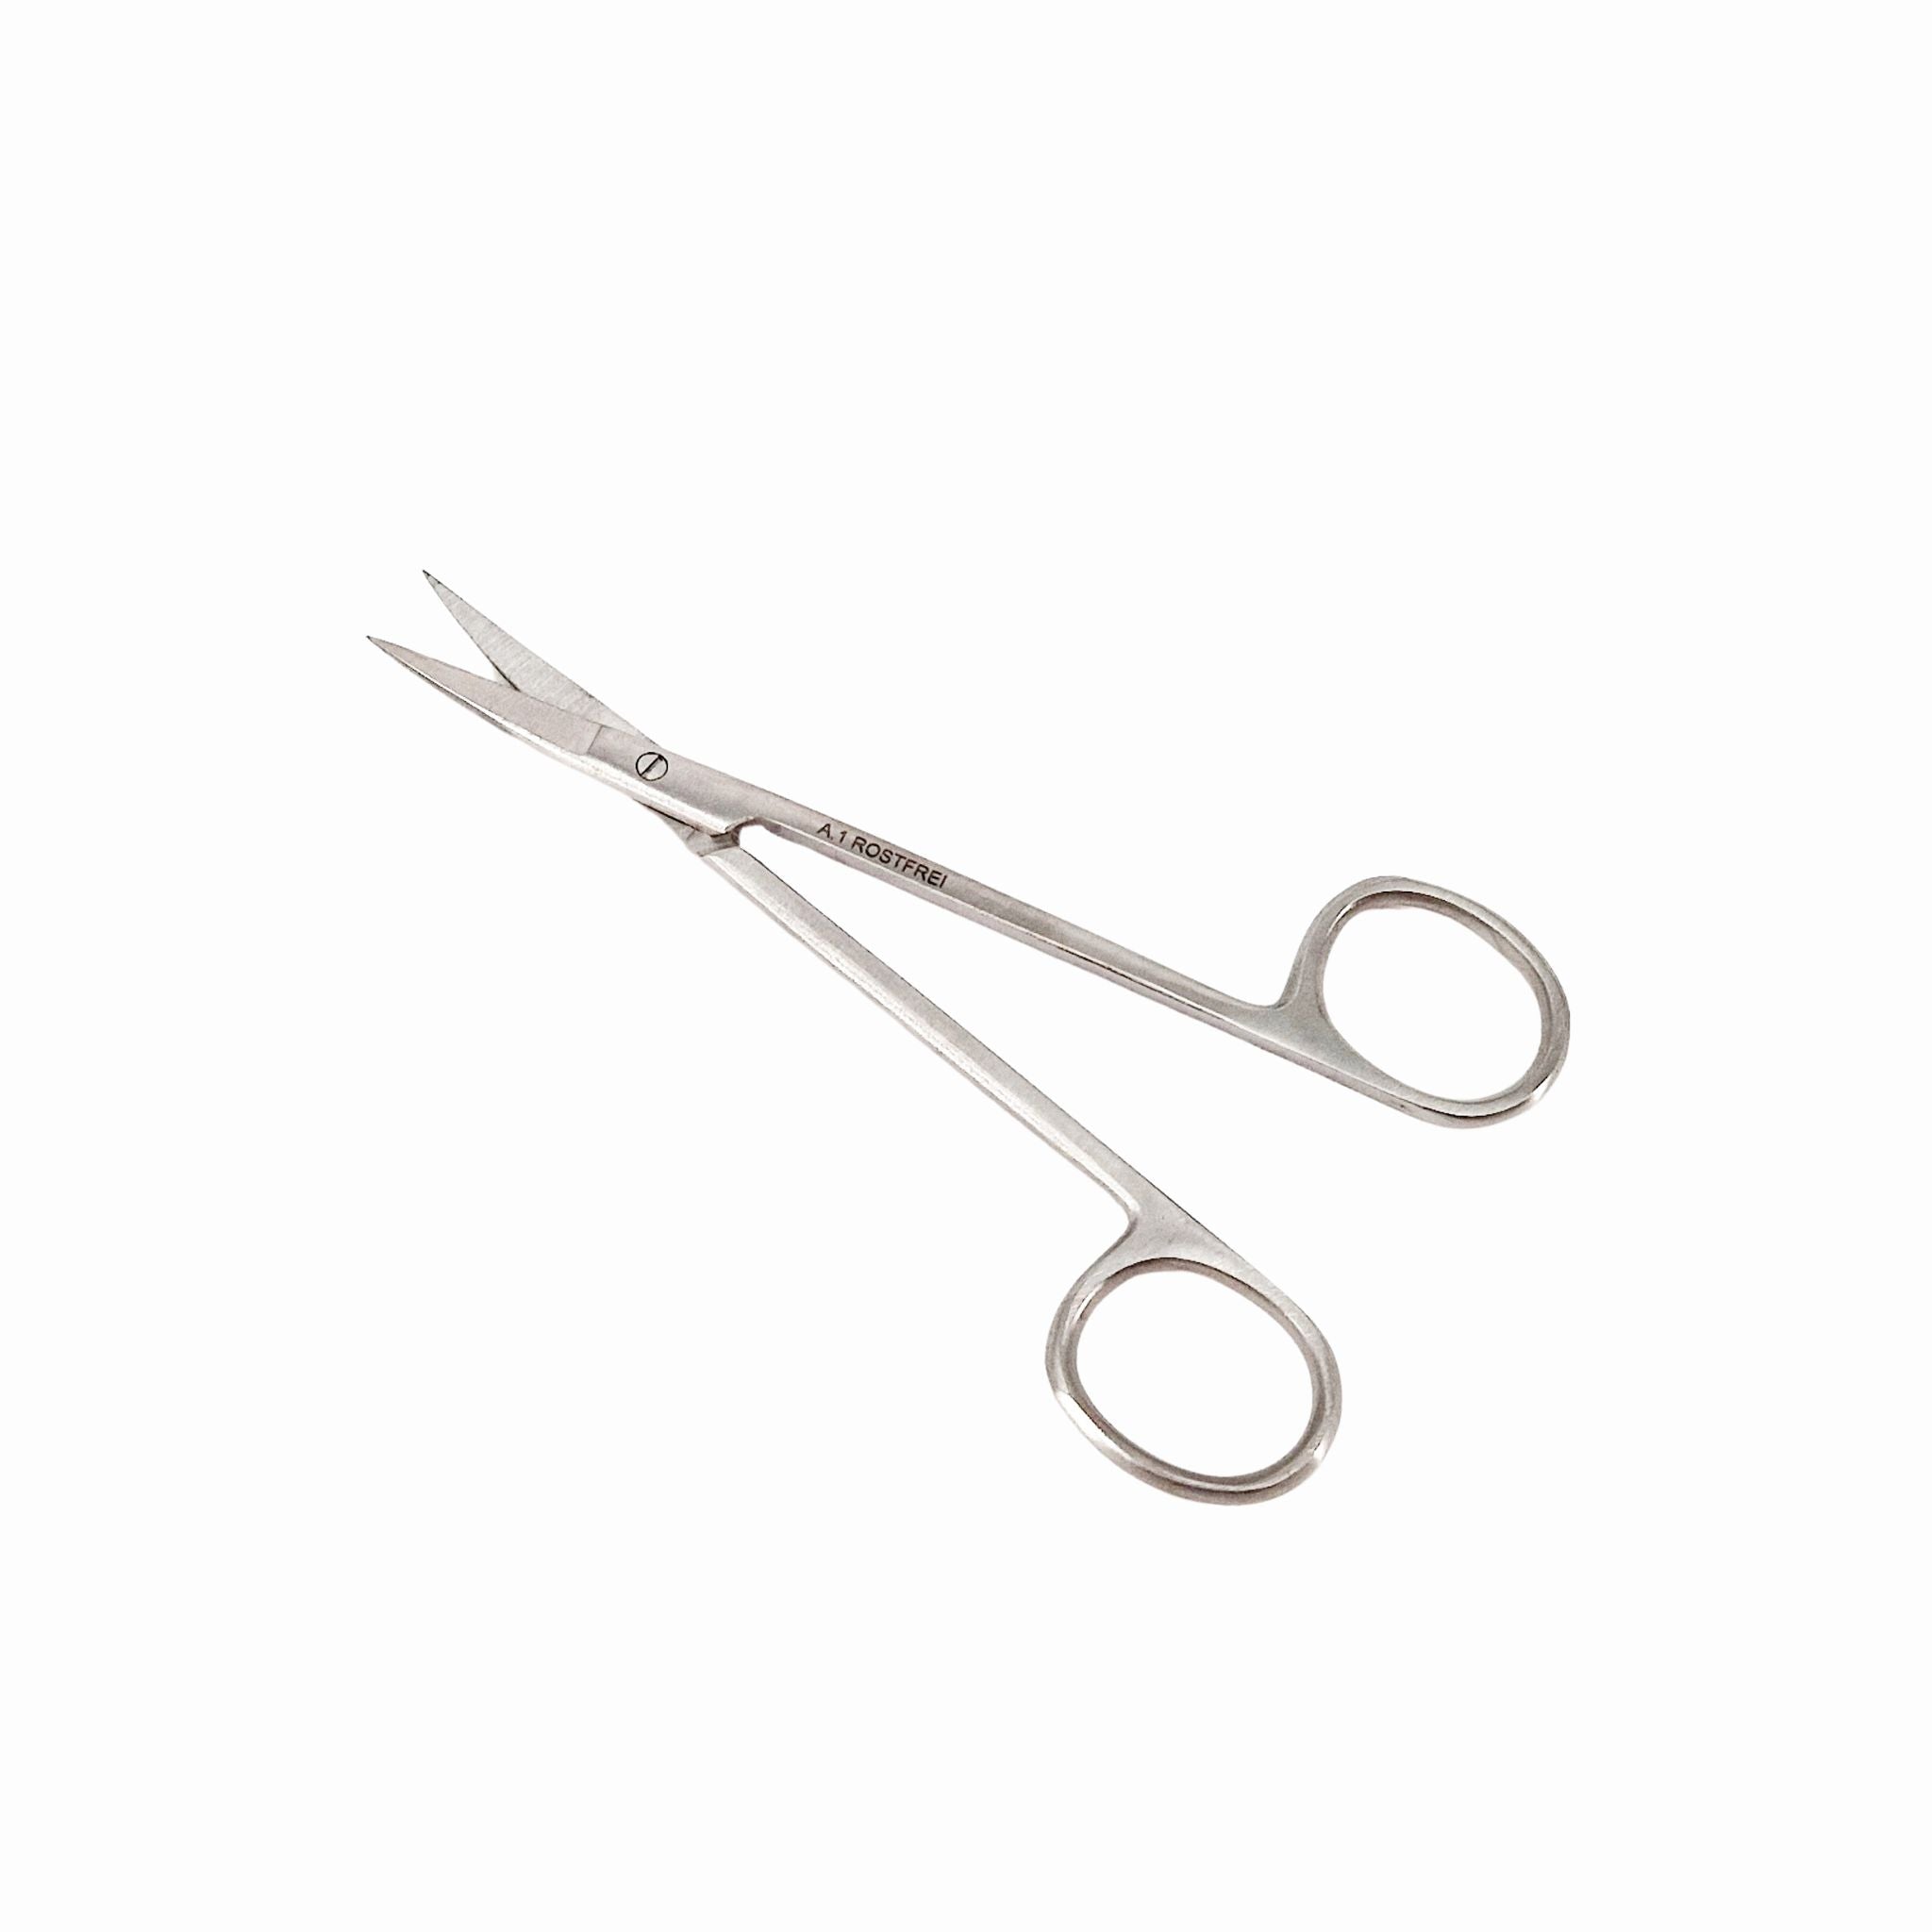 Lavabis skin and thread scissors curved stainless steel - 0